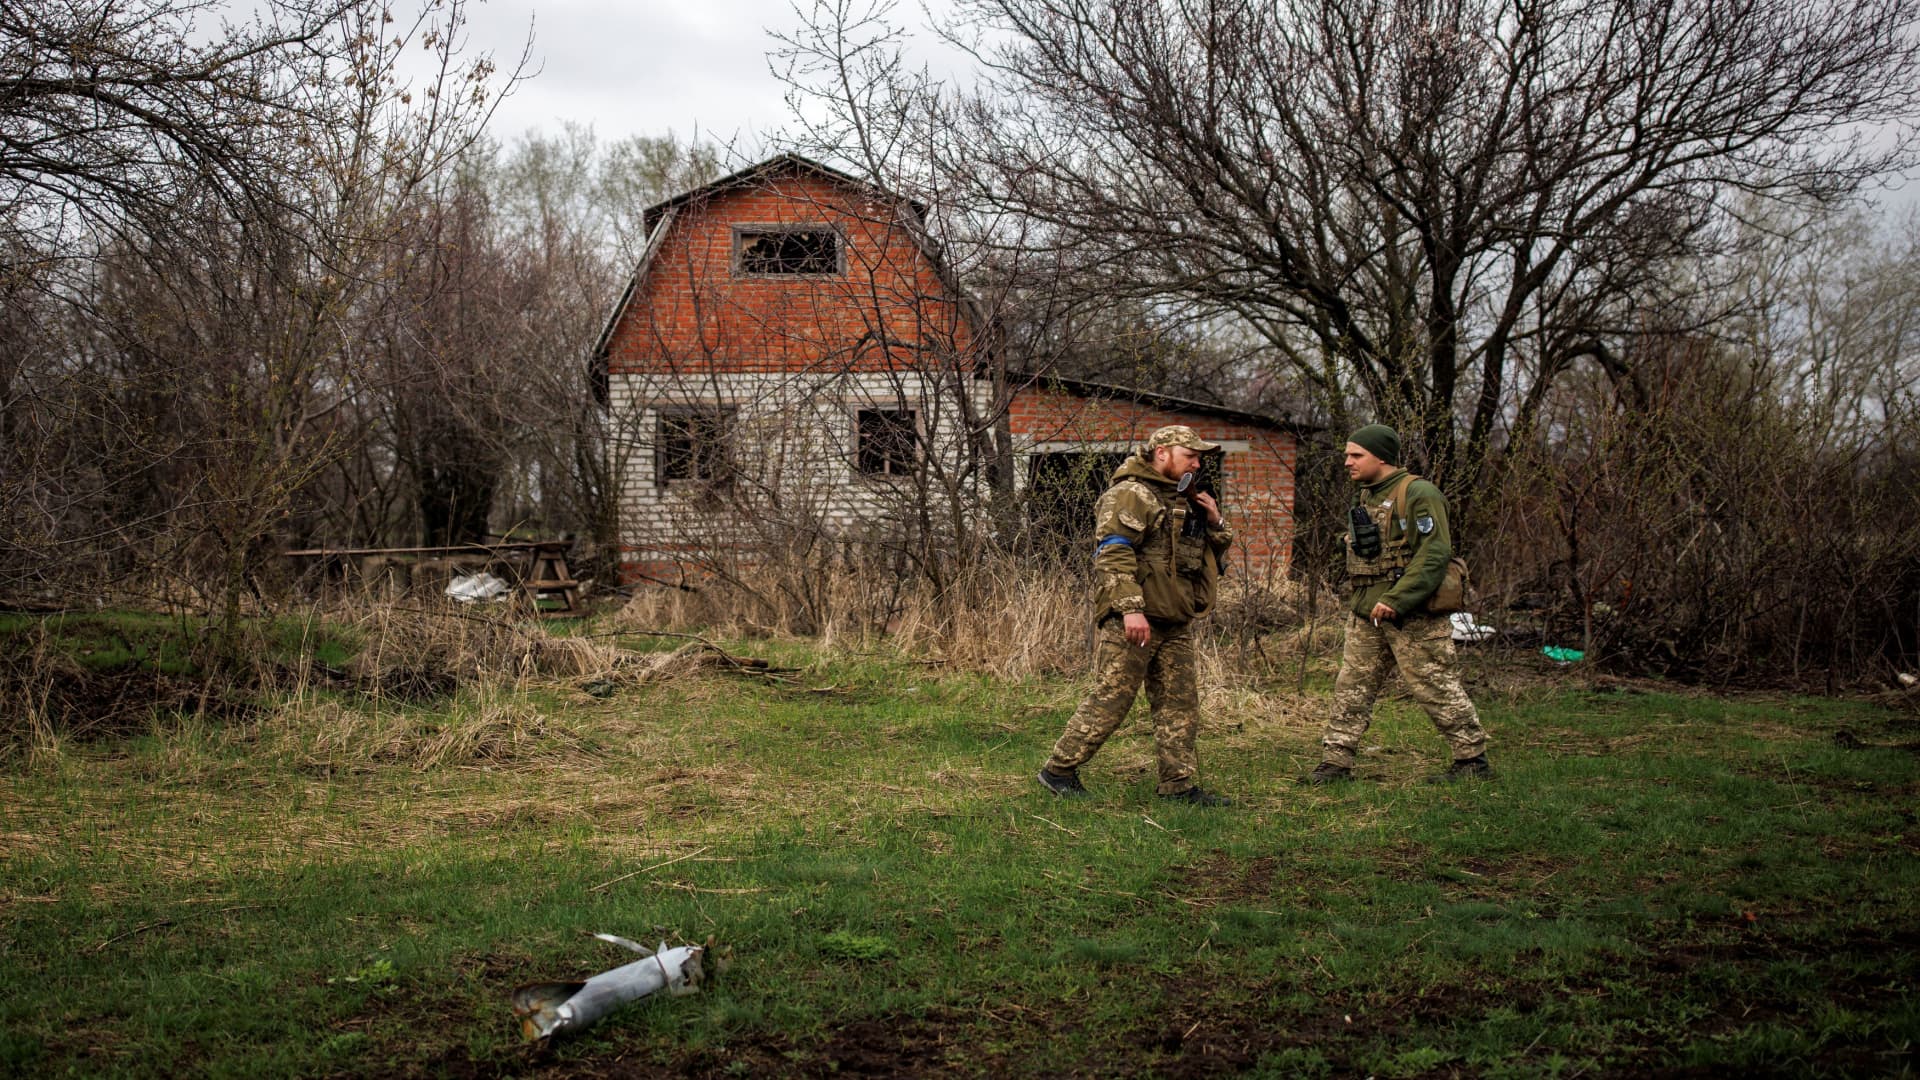 Ukrainian soldiers stand outside an abandoned Russian outpost, amid Russia's attack on Ukraine, in the village of Husarivka, in Kharkiv region, Ukraine, April 14, 2022.